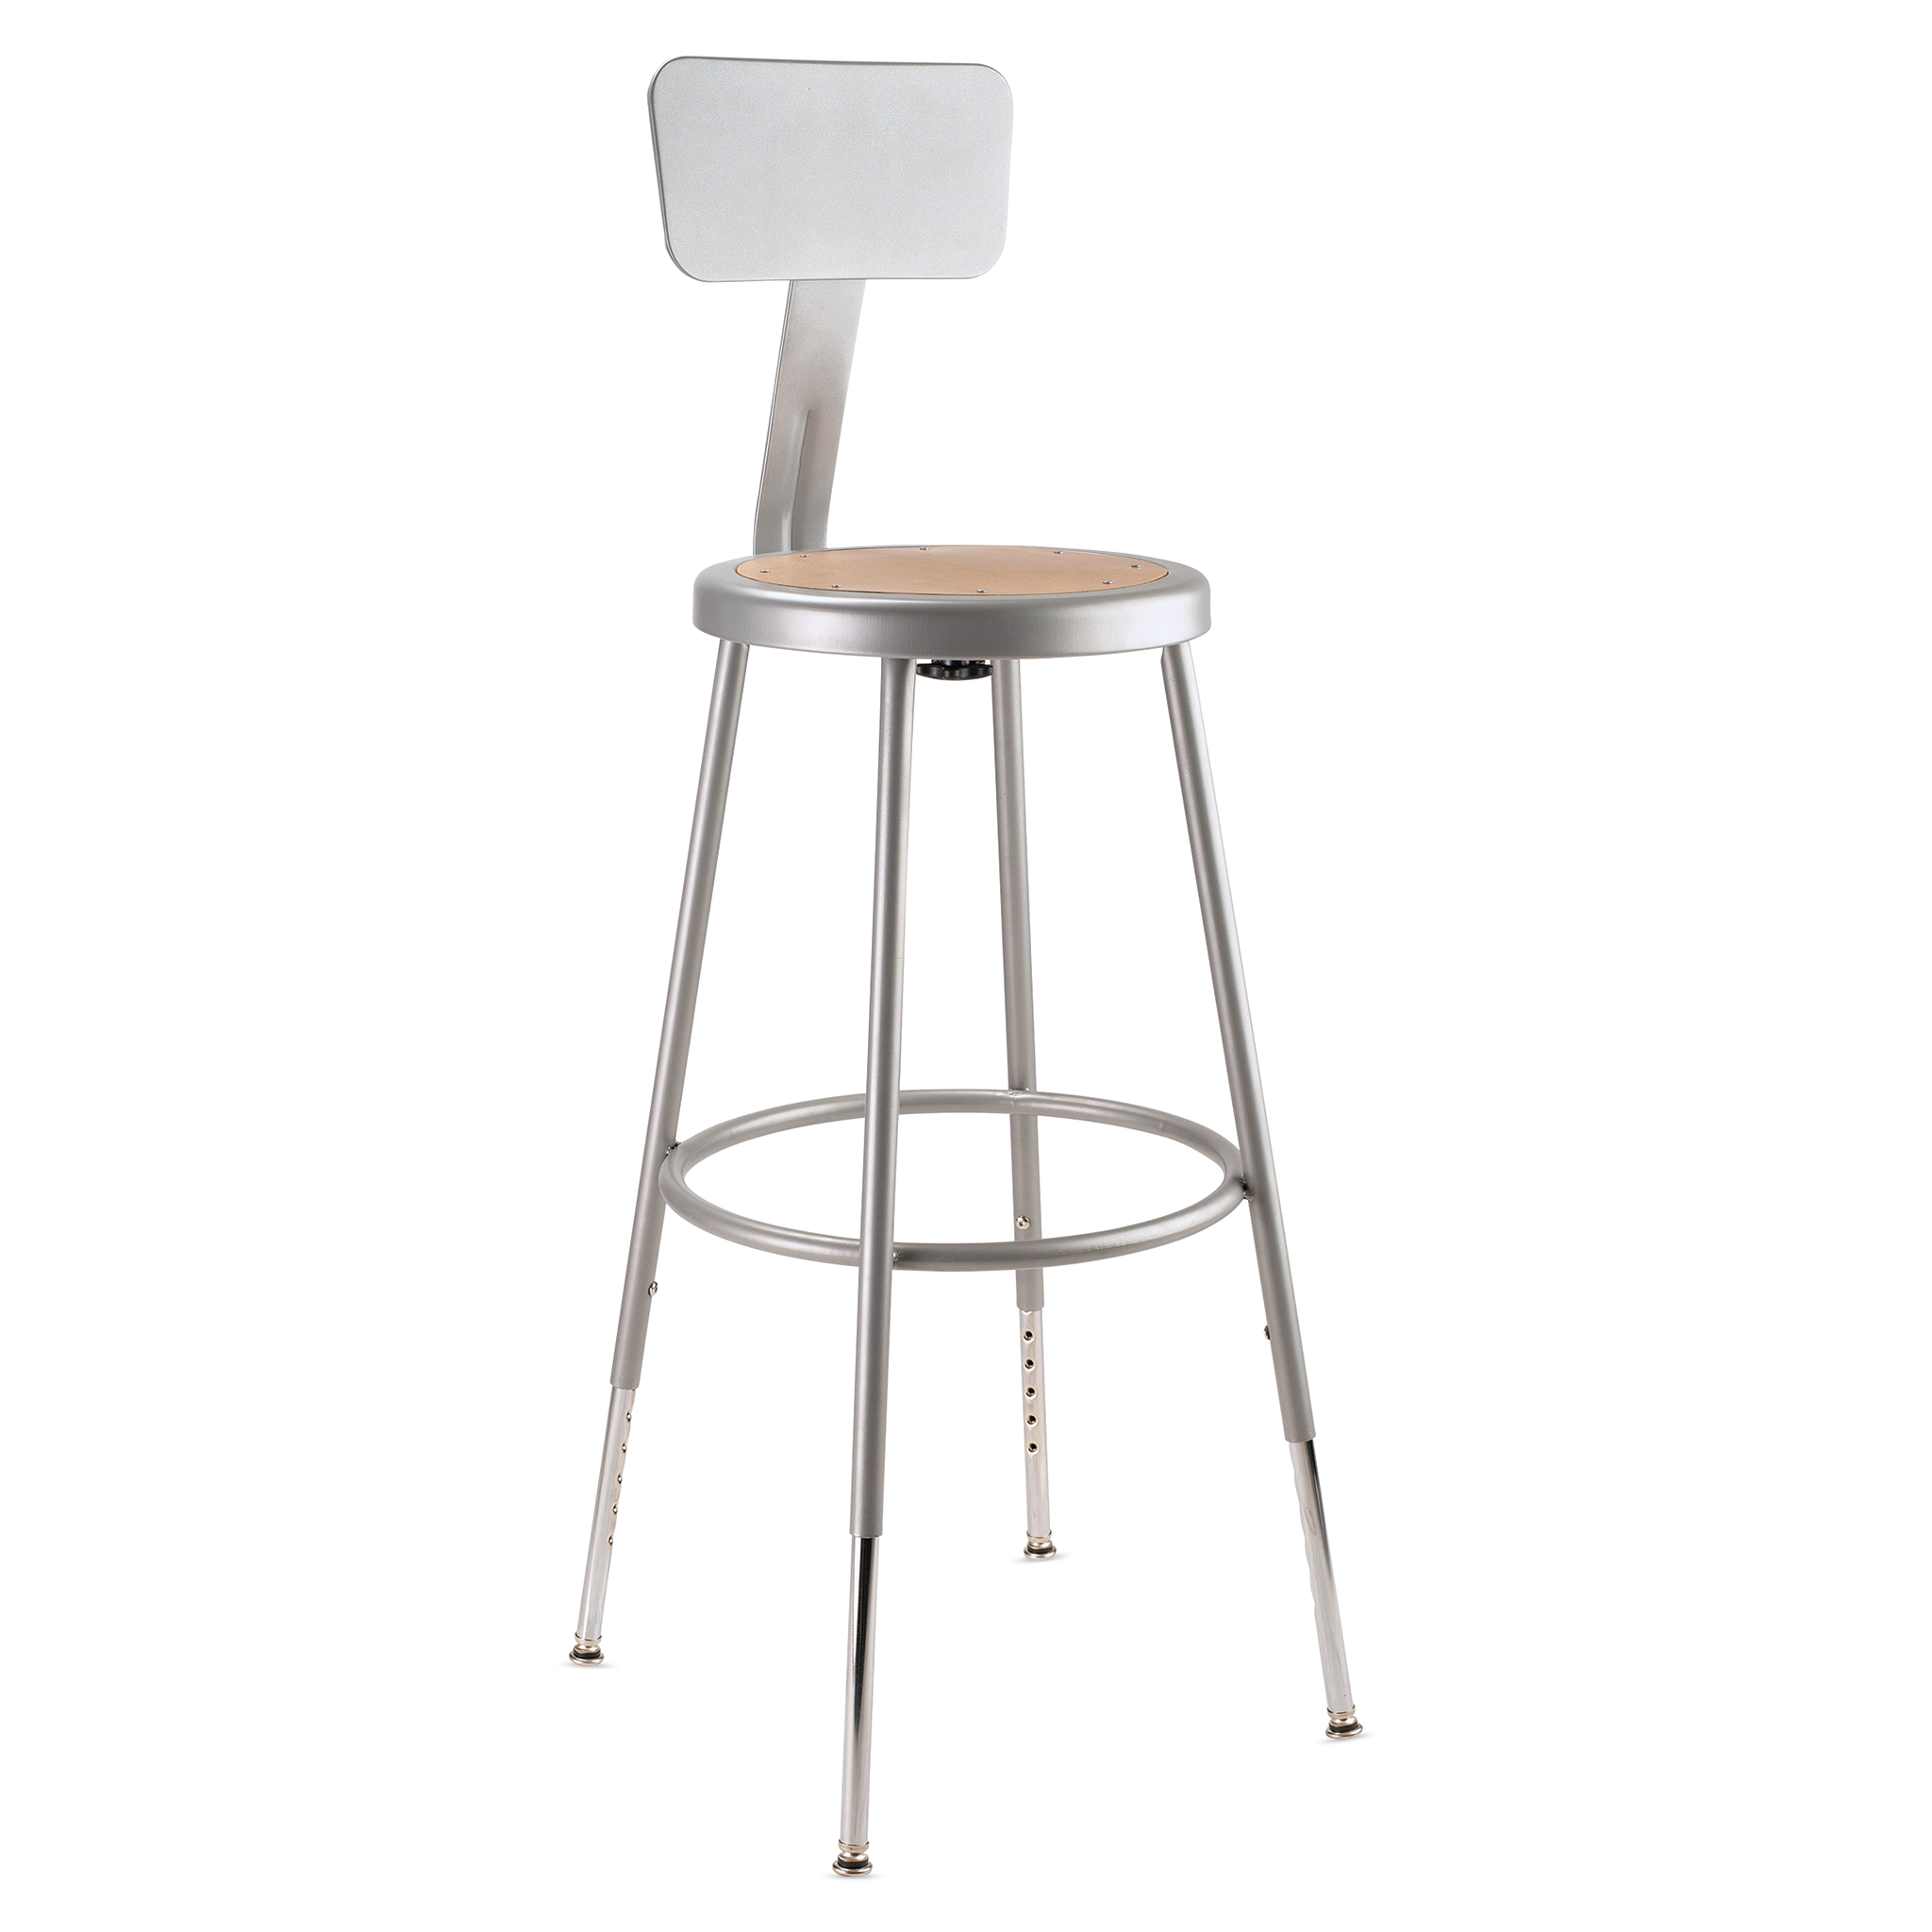 National Public Seating Corp Adjustable Stool with Backrest - Gray, 25' to 33'